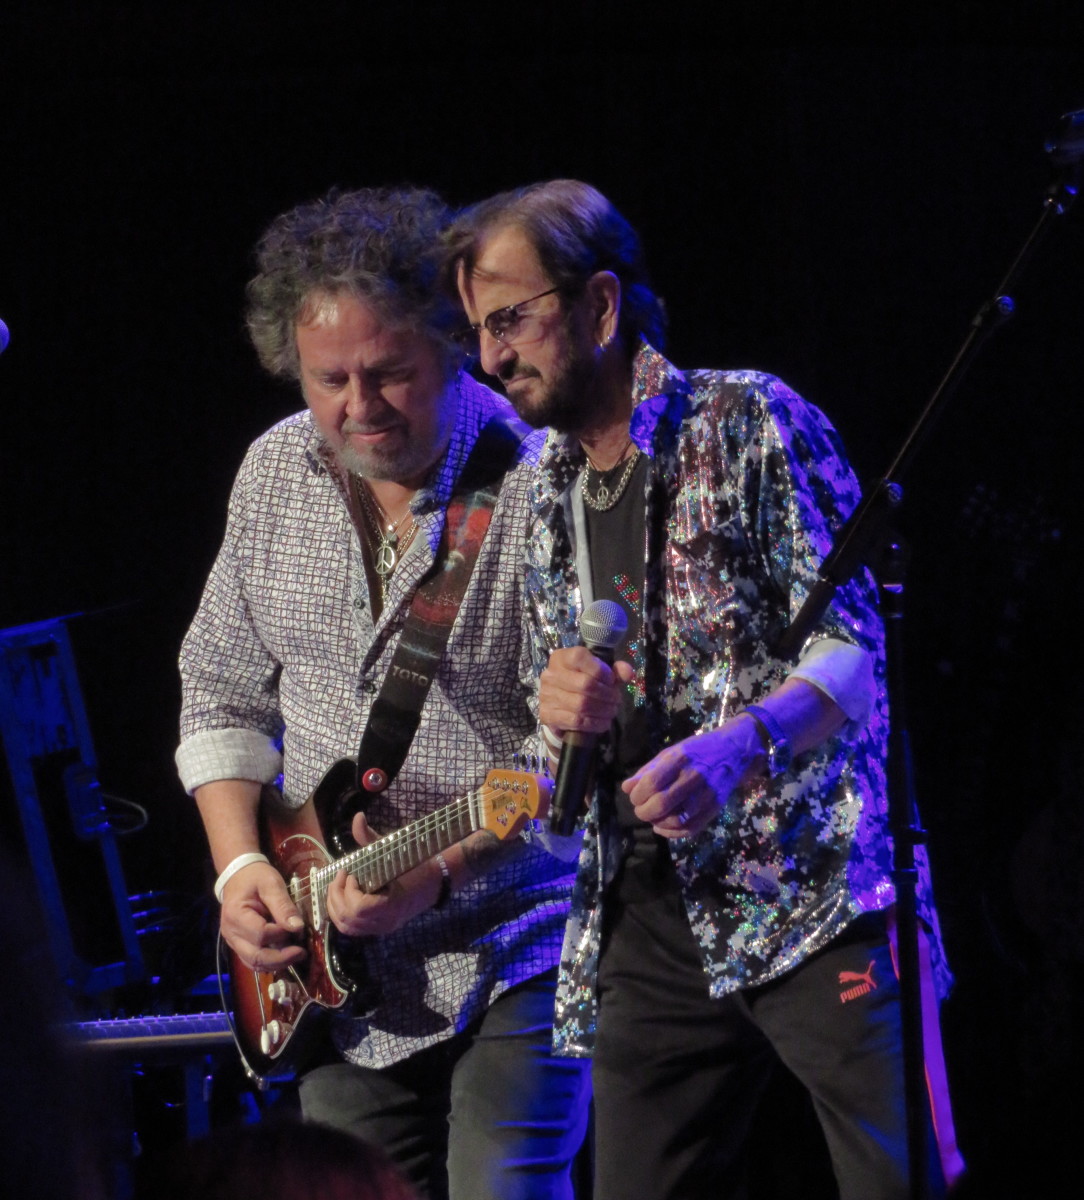 Steve Lukather and Ringo jamming.